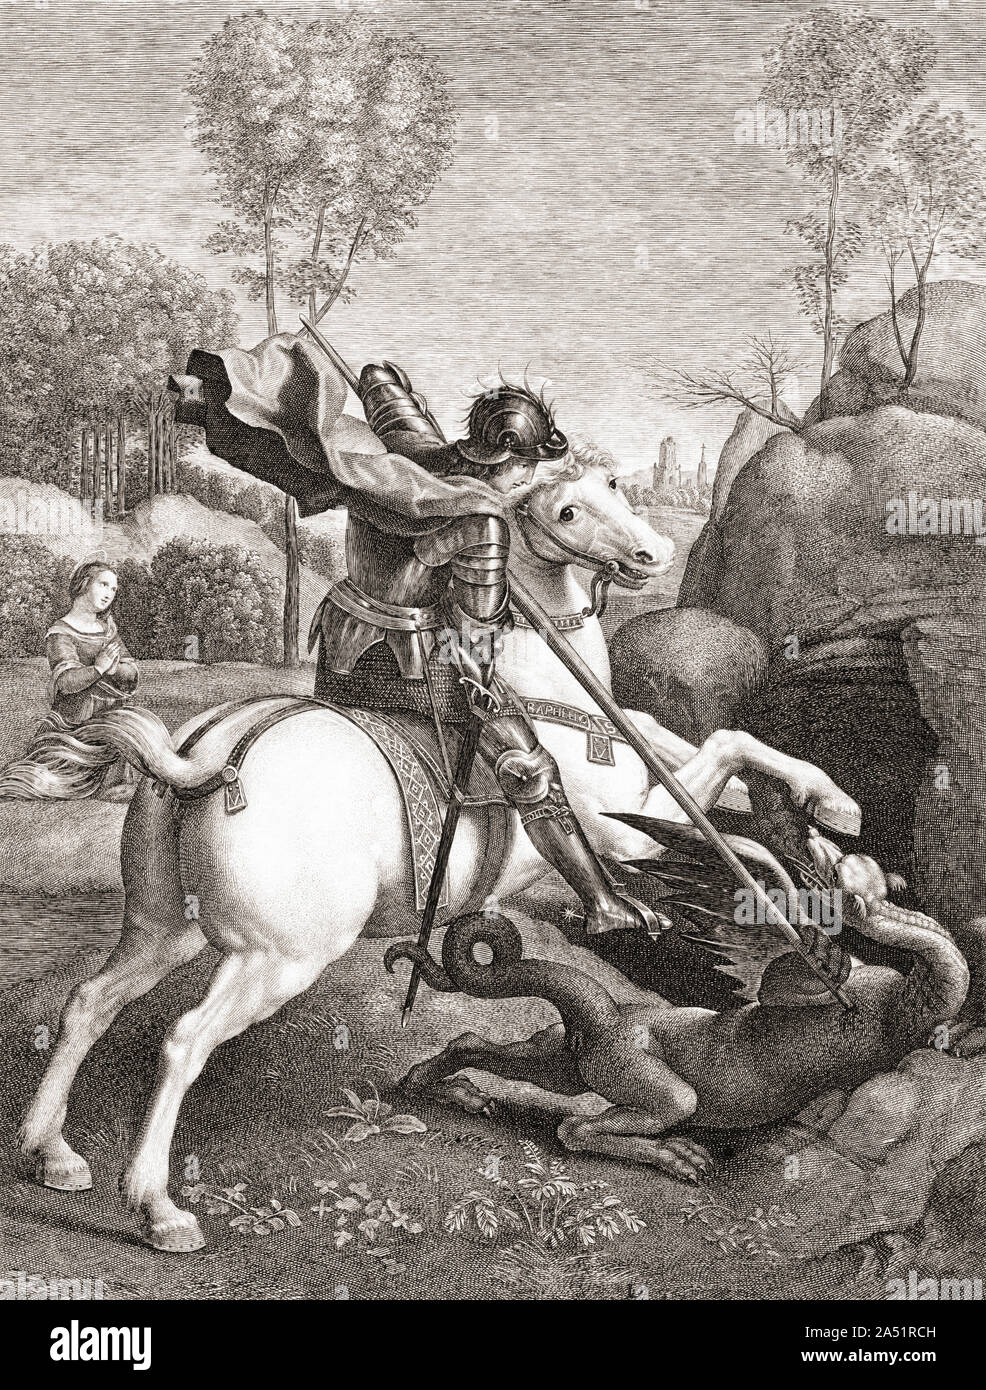 St. George and the dragon.  St. George kills the dragon with his spear, thus saving the King’s daughter who was to be sacrificed to the dragon. Stock Photo